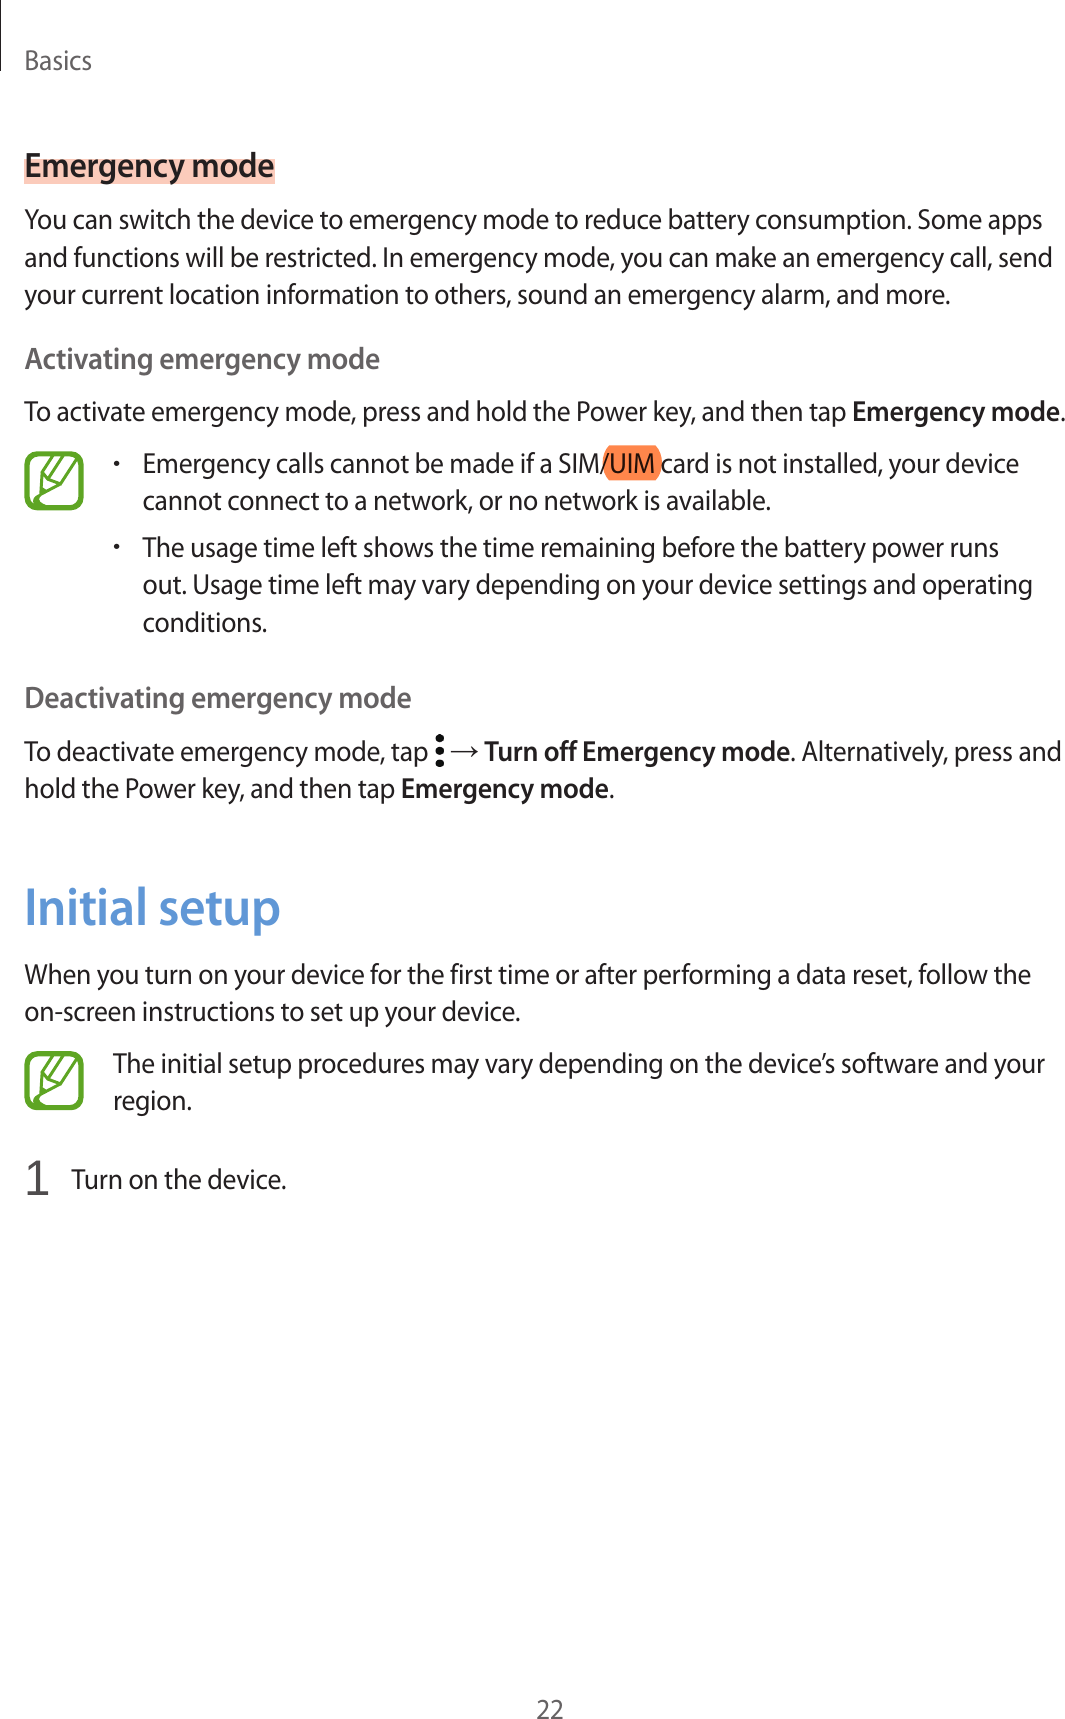 Basics22Emergency modeYou can switch the device to emergency mode to reduce battery consumption. Some apps and functions will be restricted. In emergency mode, you can make an emergency call, send your current location information to others, sound an emergency alarm, and more.Activating emergency modeTo activate emergency mode, press and hold the Power key, and then tap Emergency mode.•Emergency calls cannot be made if a SIM/UIM card is not installed, your device cannot connect to a network, or no network is available.•The usage time left shows the time remaining before the battery power runs out. Usage time left may vary depending on your device settings and operating conditions.Deactivating emergency modeTo deactivate emergency mode, tap   → Turn off Emergency mode. Alternatively, press and hold the Power key, and then tap Emergency mode.Initial setupWhen you turn on your device for the first time or after performing a data reset, follow the on-screen instructions to set up your device.The initial setup procedures may vary depending on the device’s software and your region.1  Turn on the device.